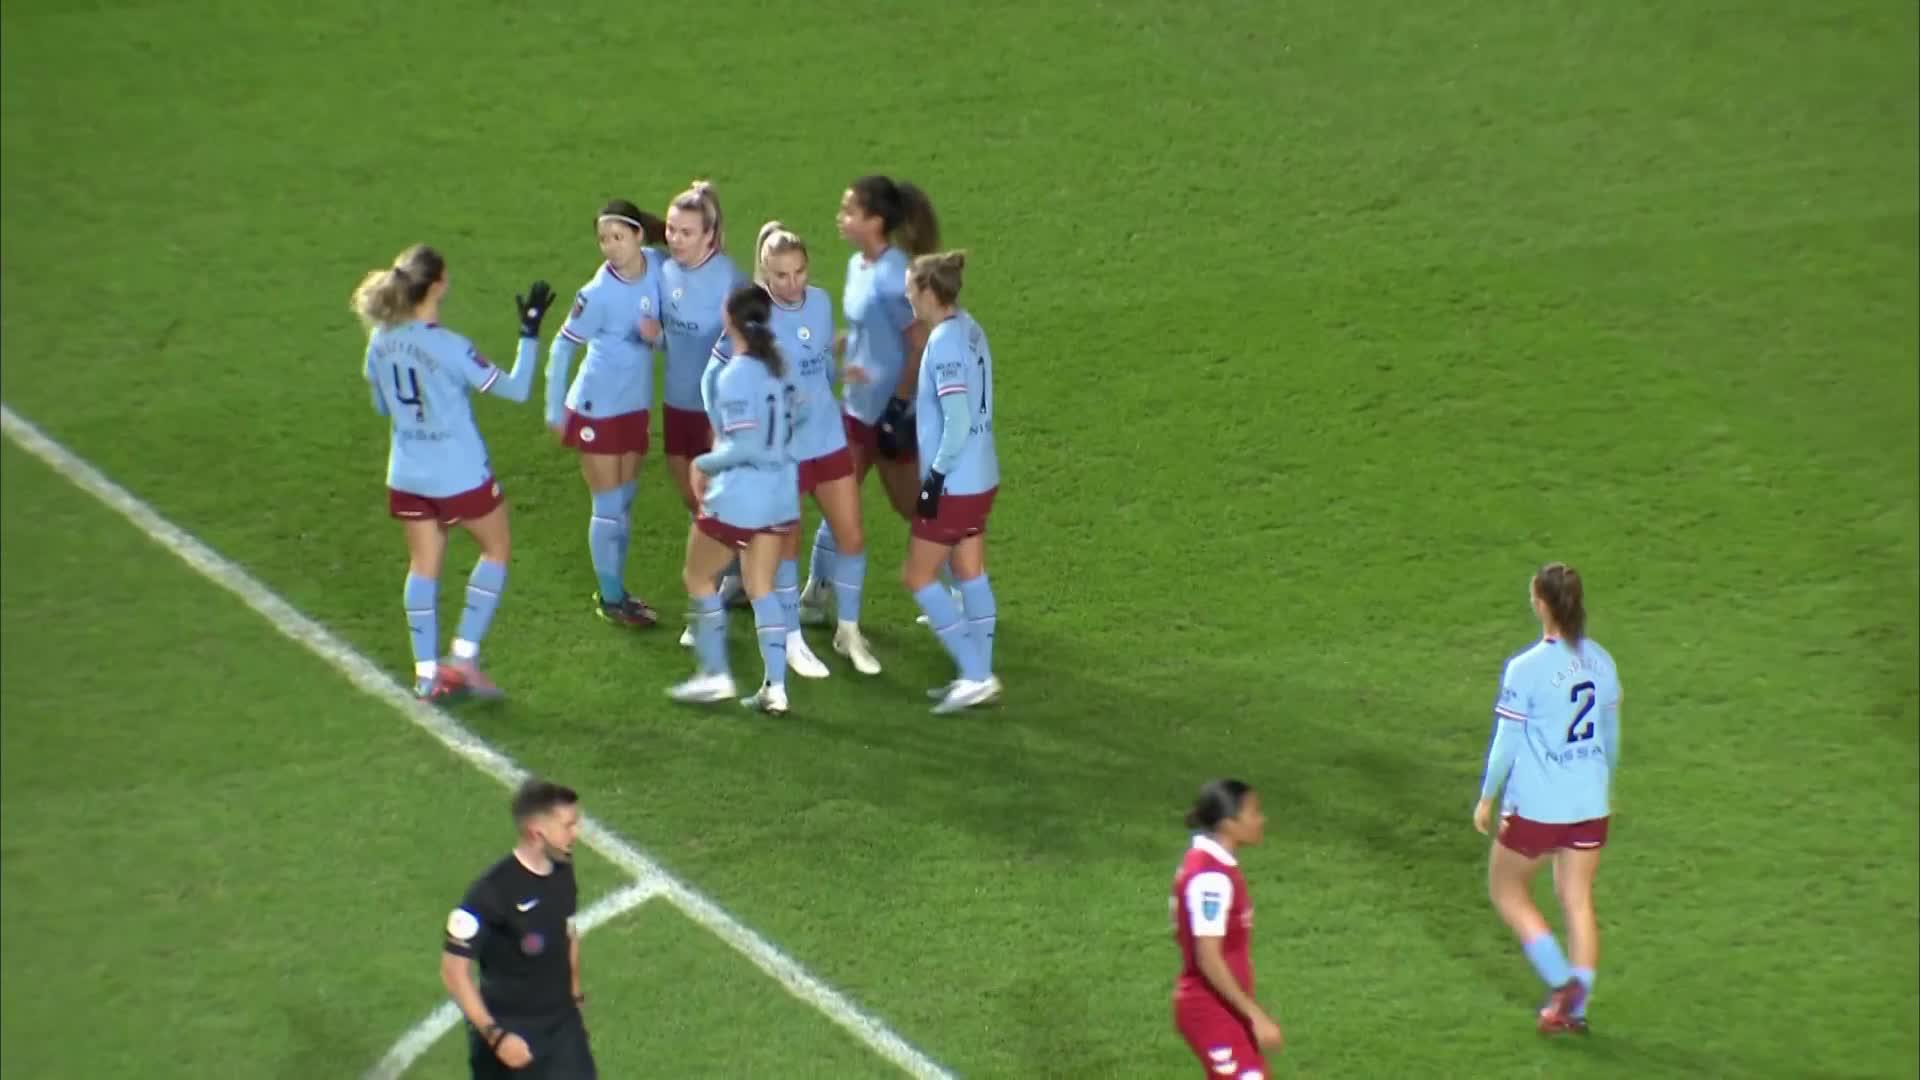 Straight after an assist @lauren__hemp gets in on the action! 

#ContiCup @ManCityWomen”